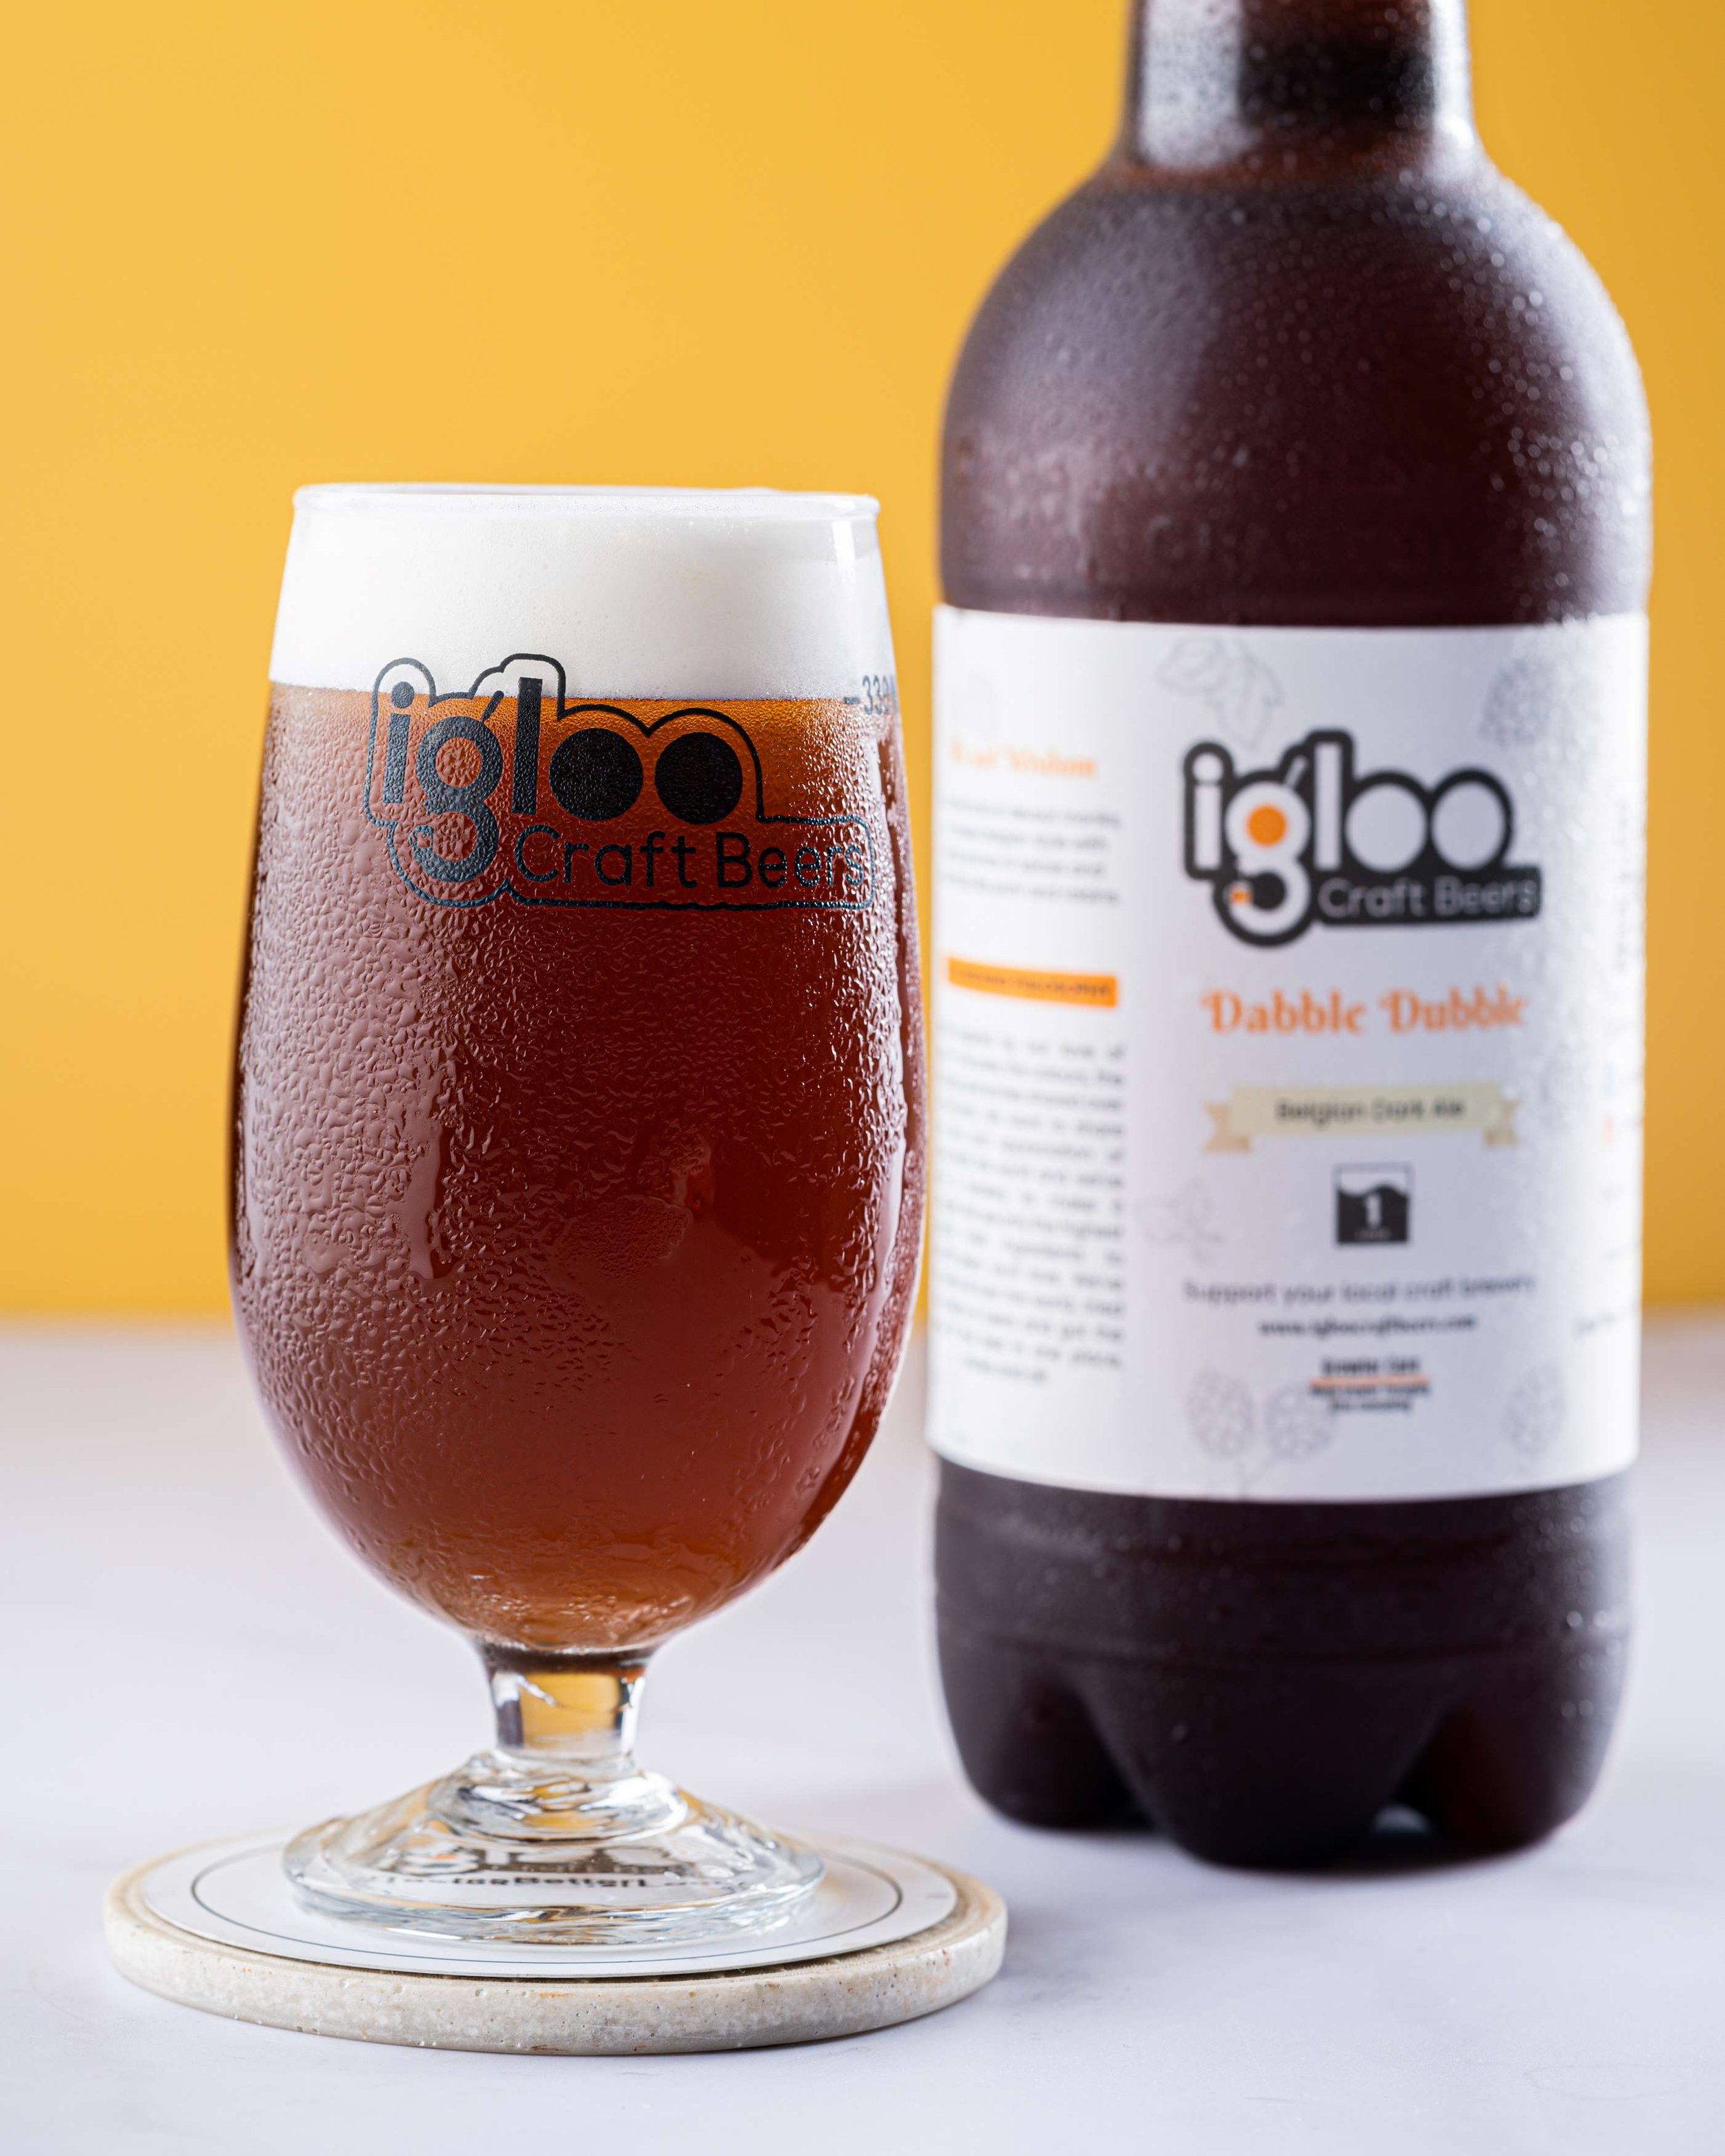 Dabble Dubble by Igloo Craft Beer.jpg